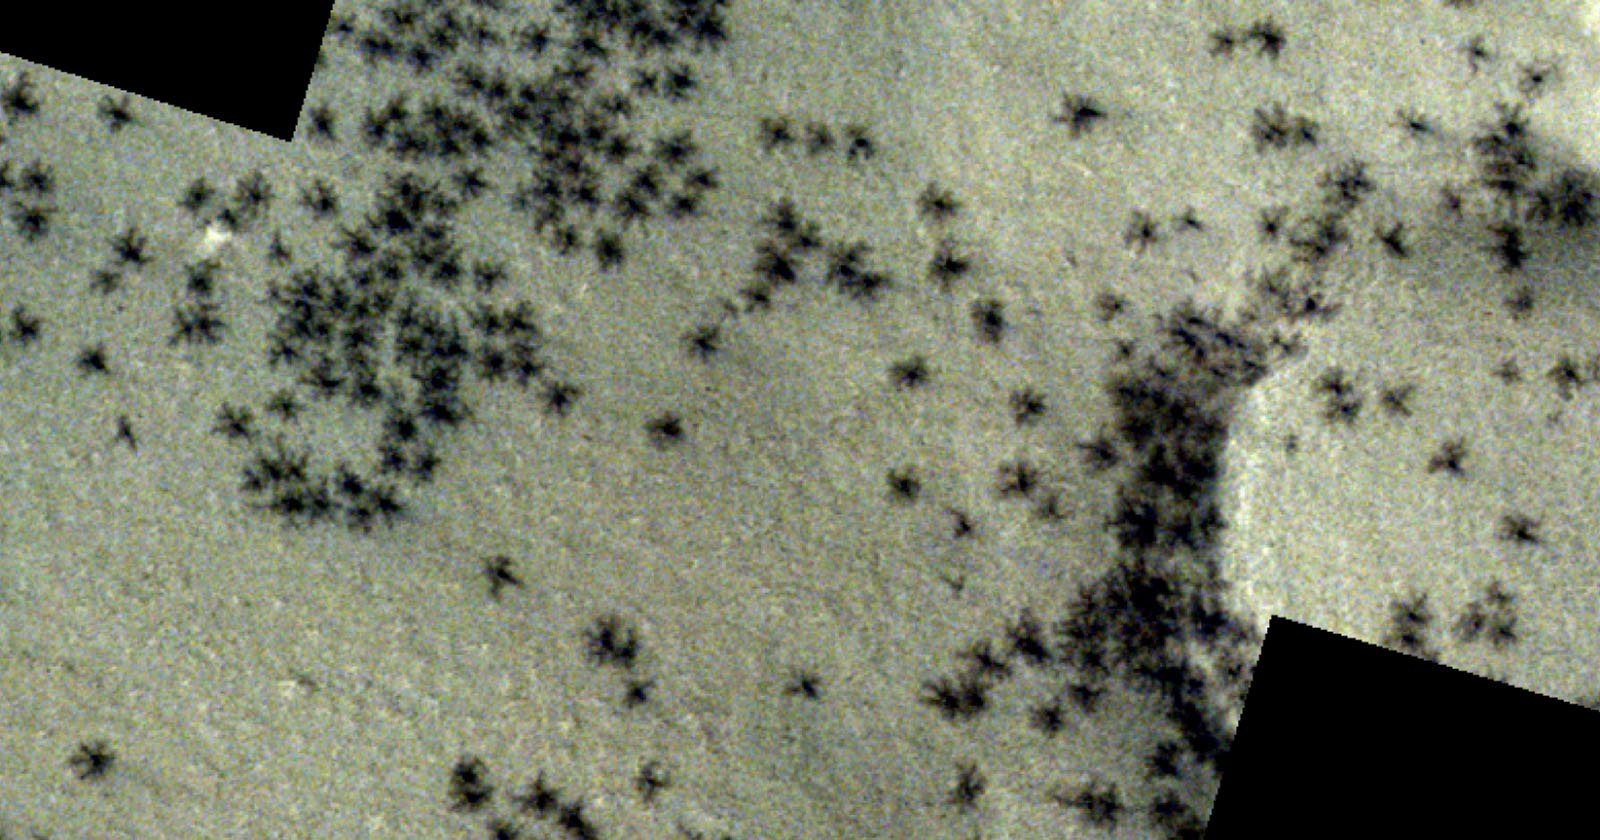 Satellite Photo Shows an Army of 'Black Spiders' on Mars | PetaPixel